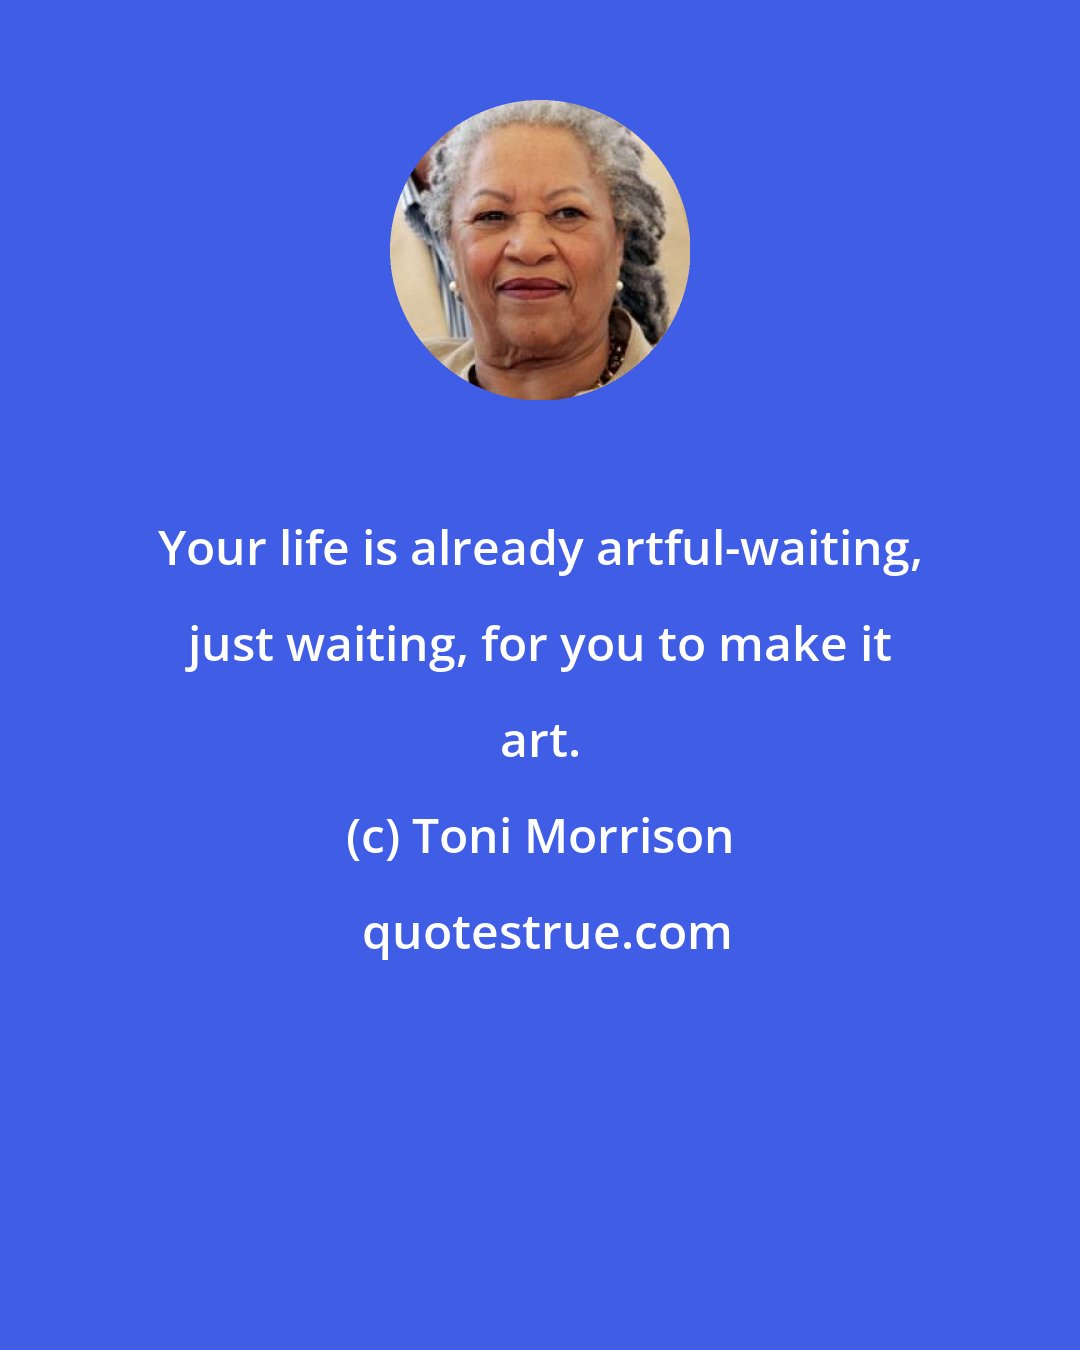 Toni Morrison: Your life is already artful-waiting, just waiting, for you to make it art.